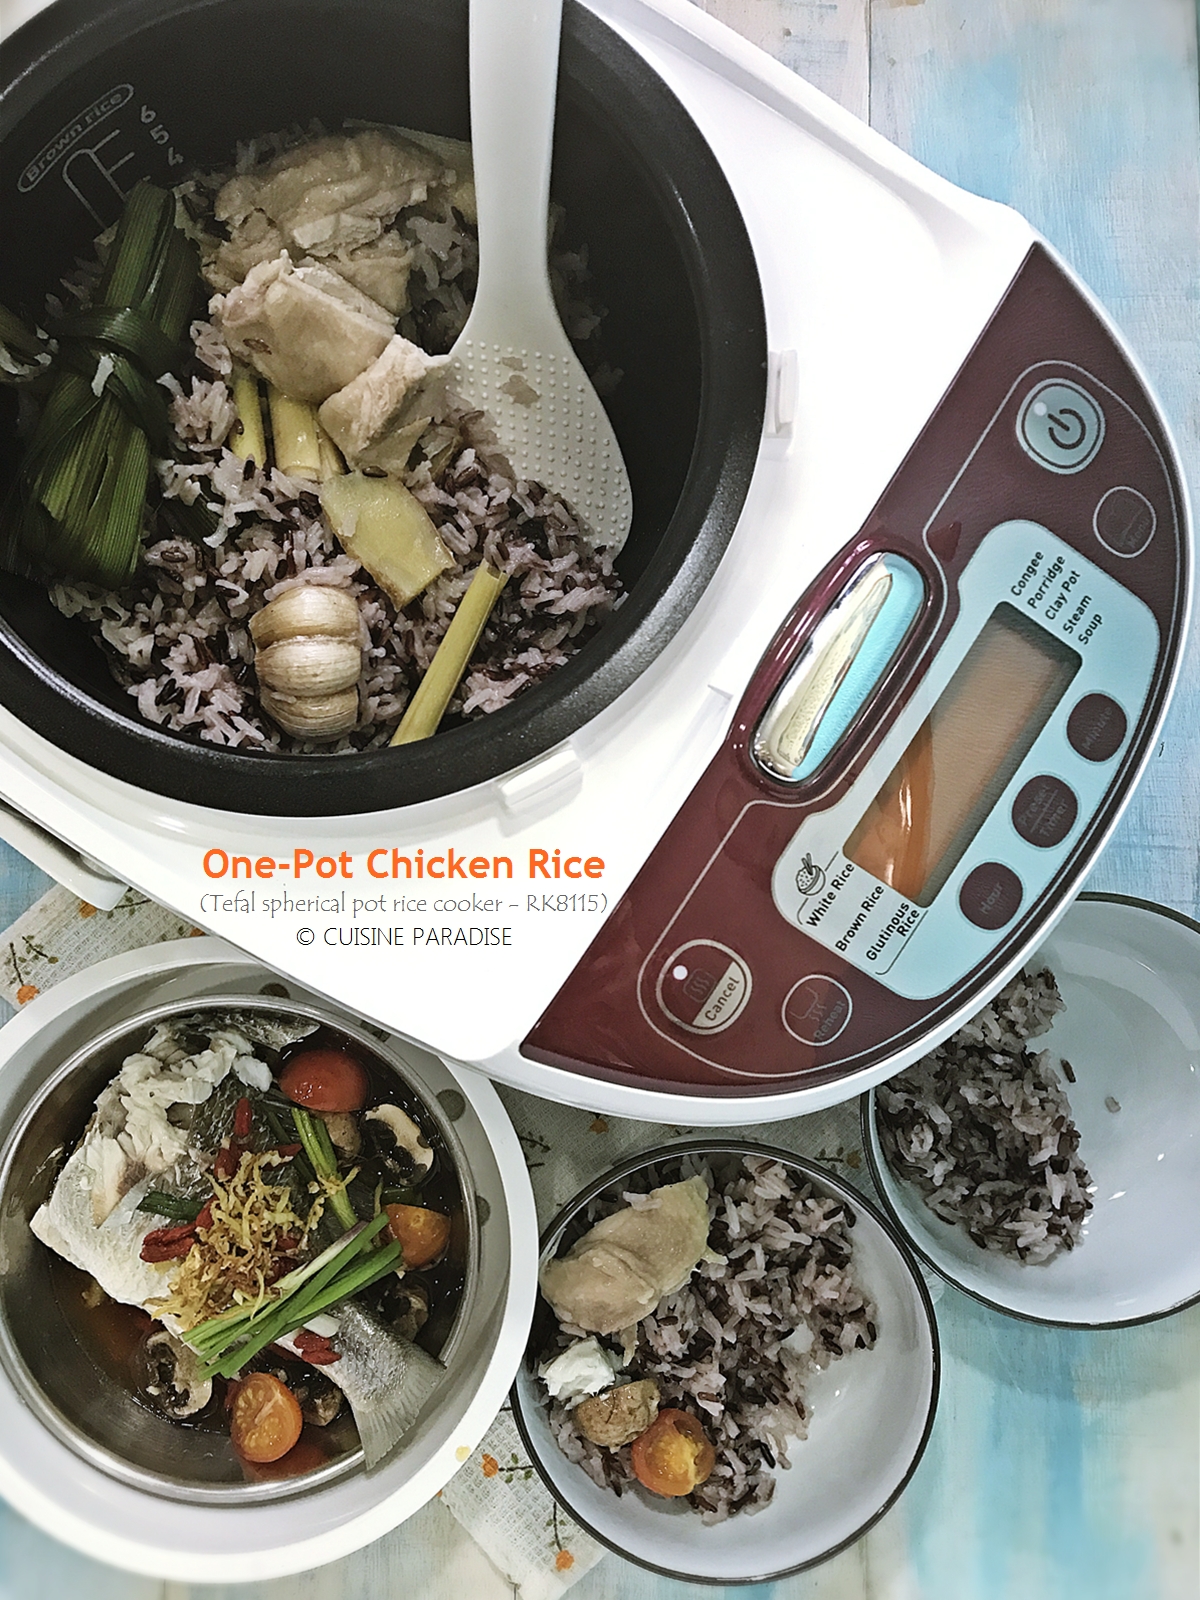 Cuisine Paradise Singapore Food Blog Recipes Reviews And Travel Recipes Videos 3 One Pot Meal With Tefal Advanced Spherical Pot Rice Cooker